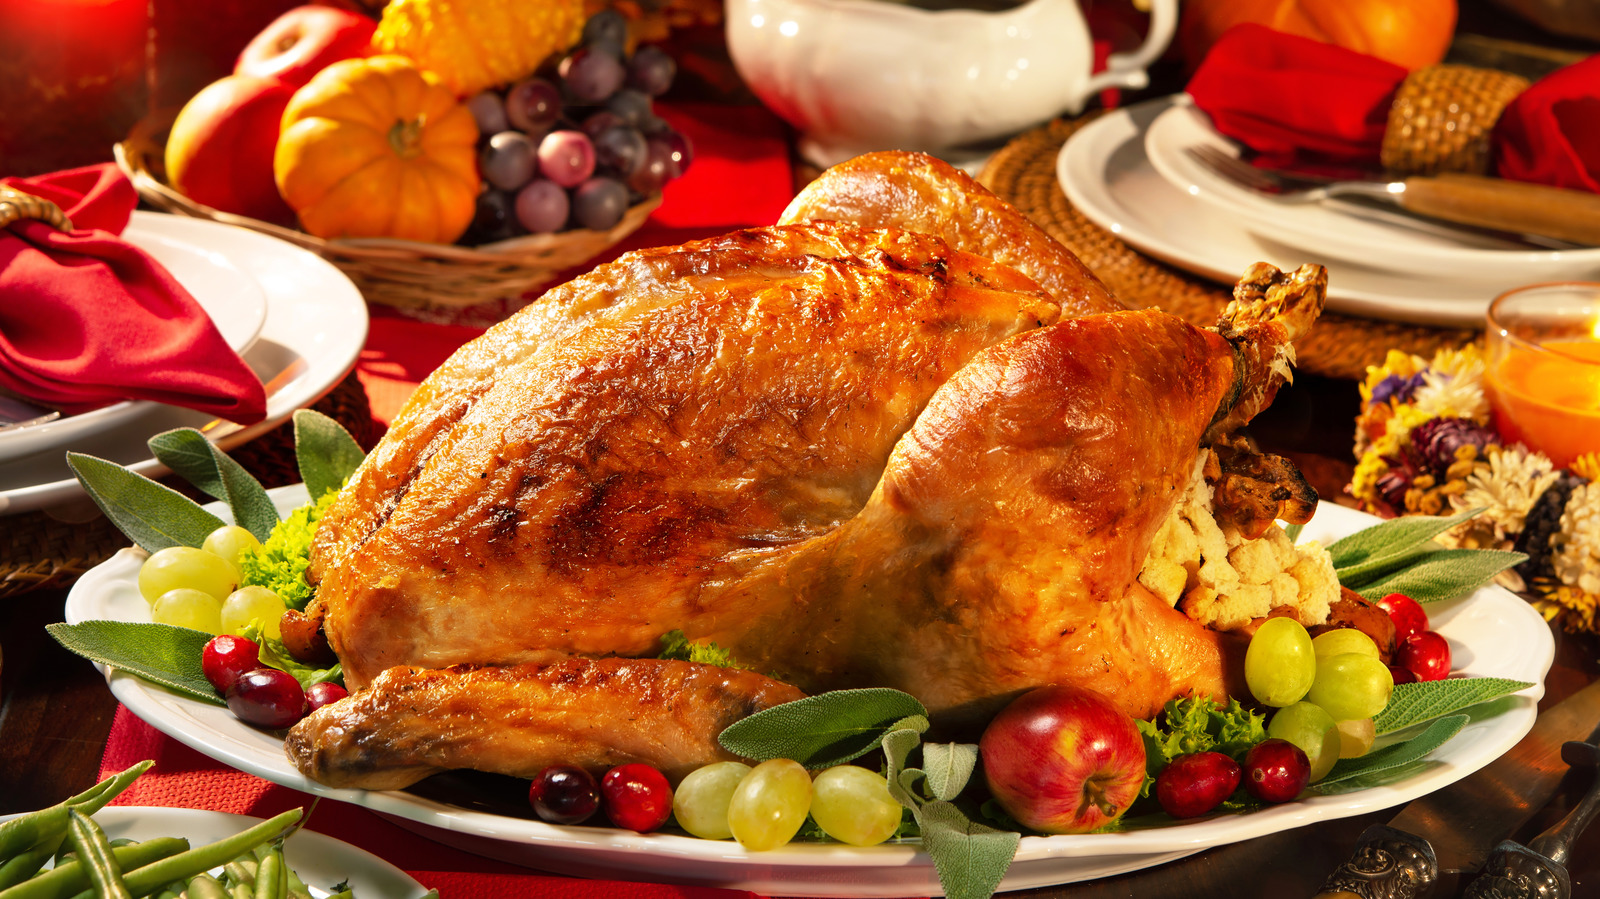 Why You Should Buy Your Thanksgiving Turkey Directly From The Farm - Mashed...